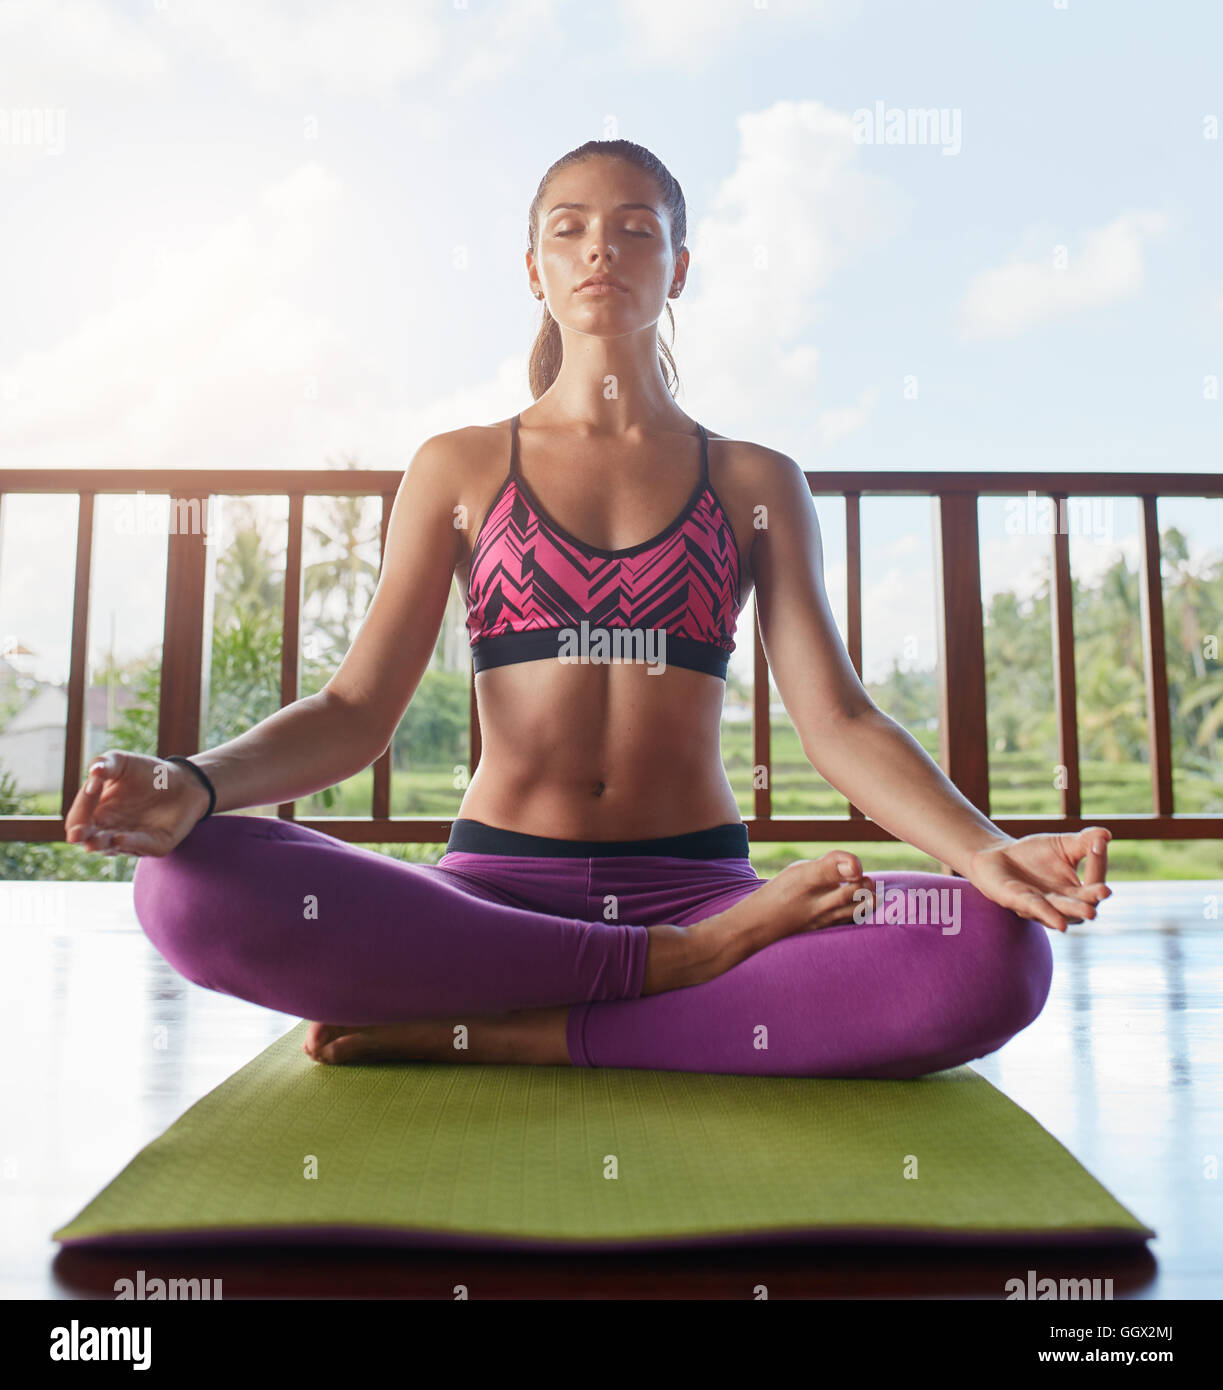 Young woman sitting on floor in yoga pose with hands on knees, Lotus pose. fitness female model doing yoga meditation. Stock Photo